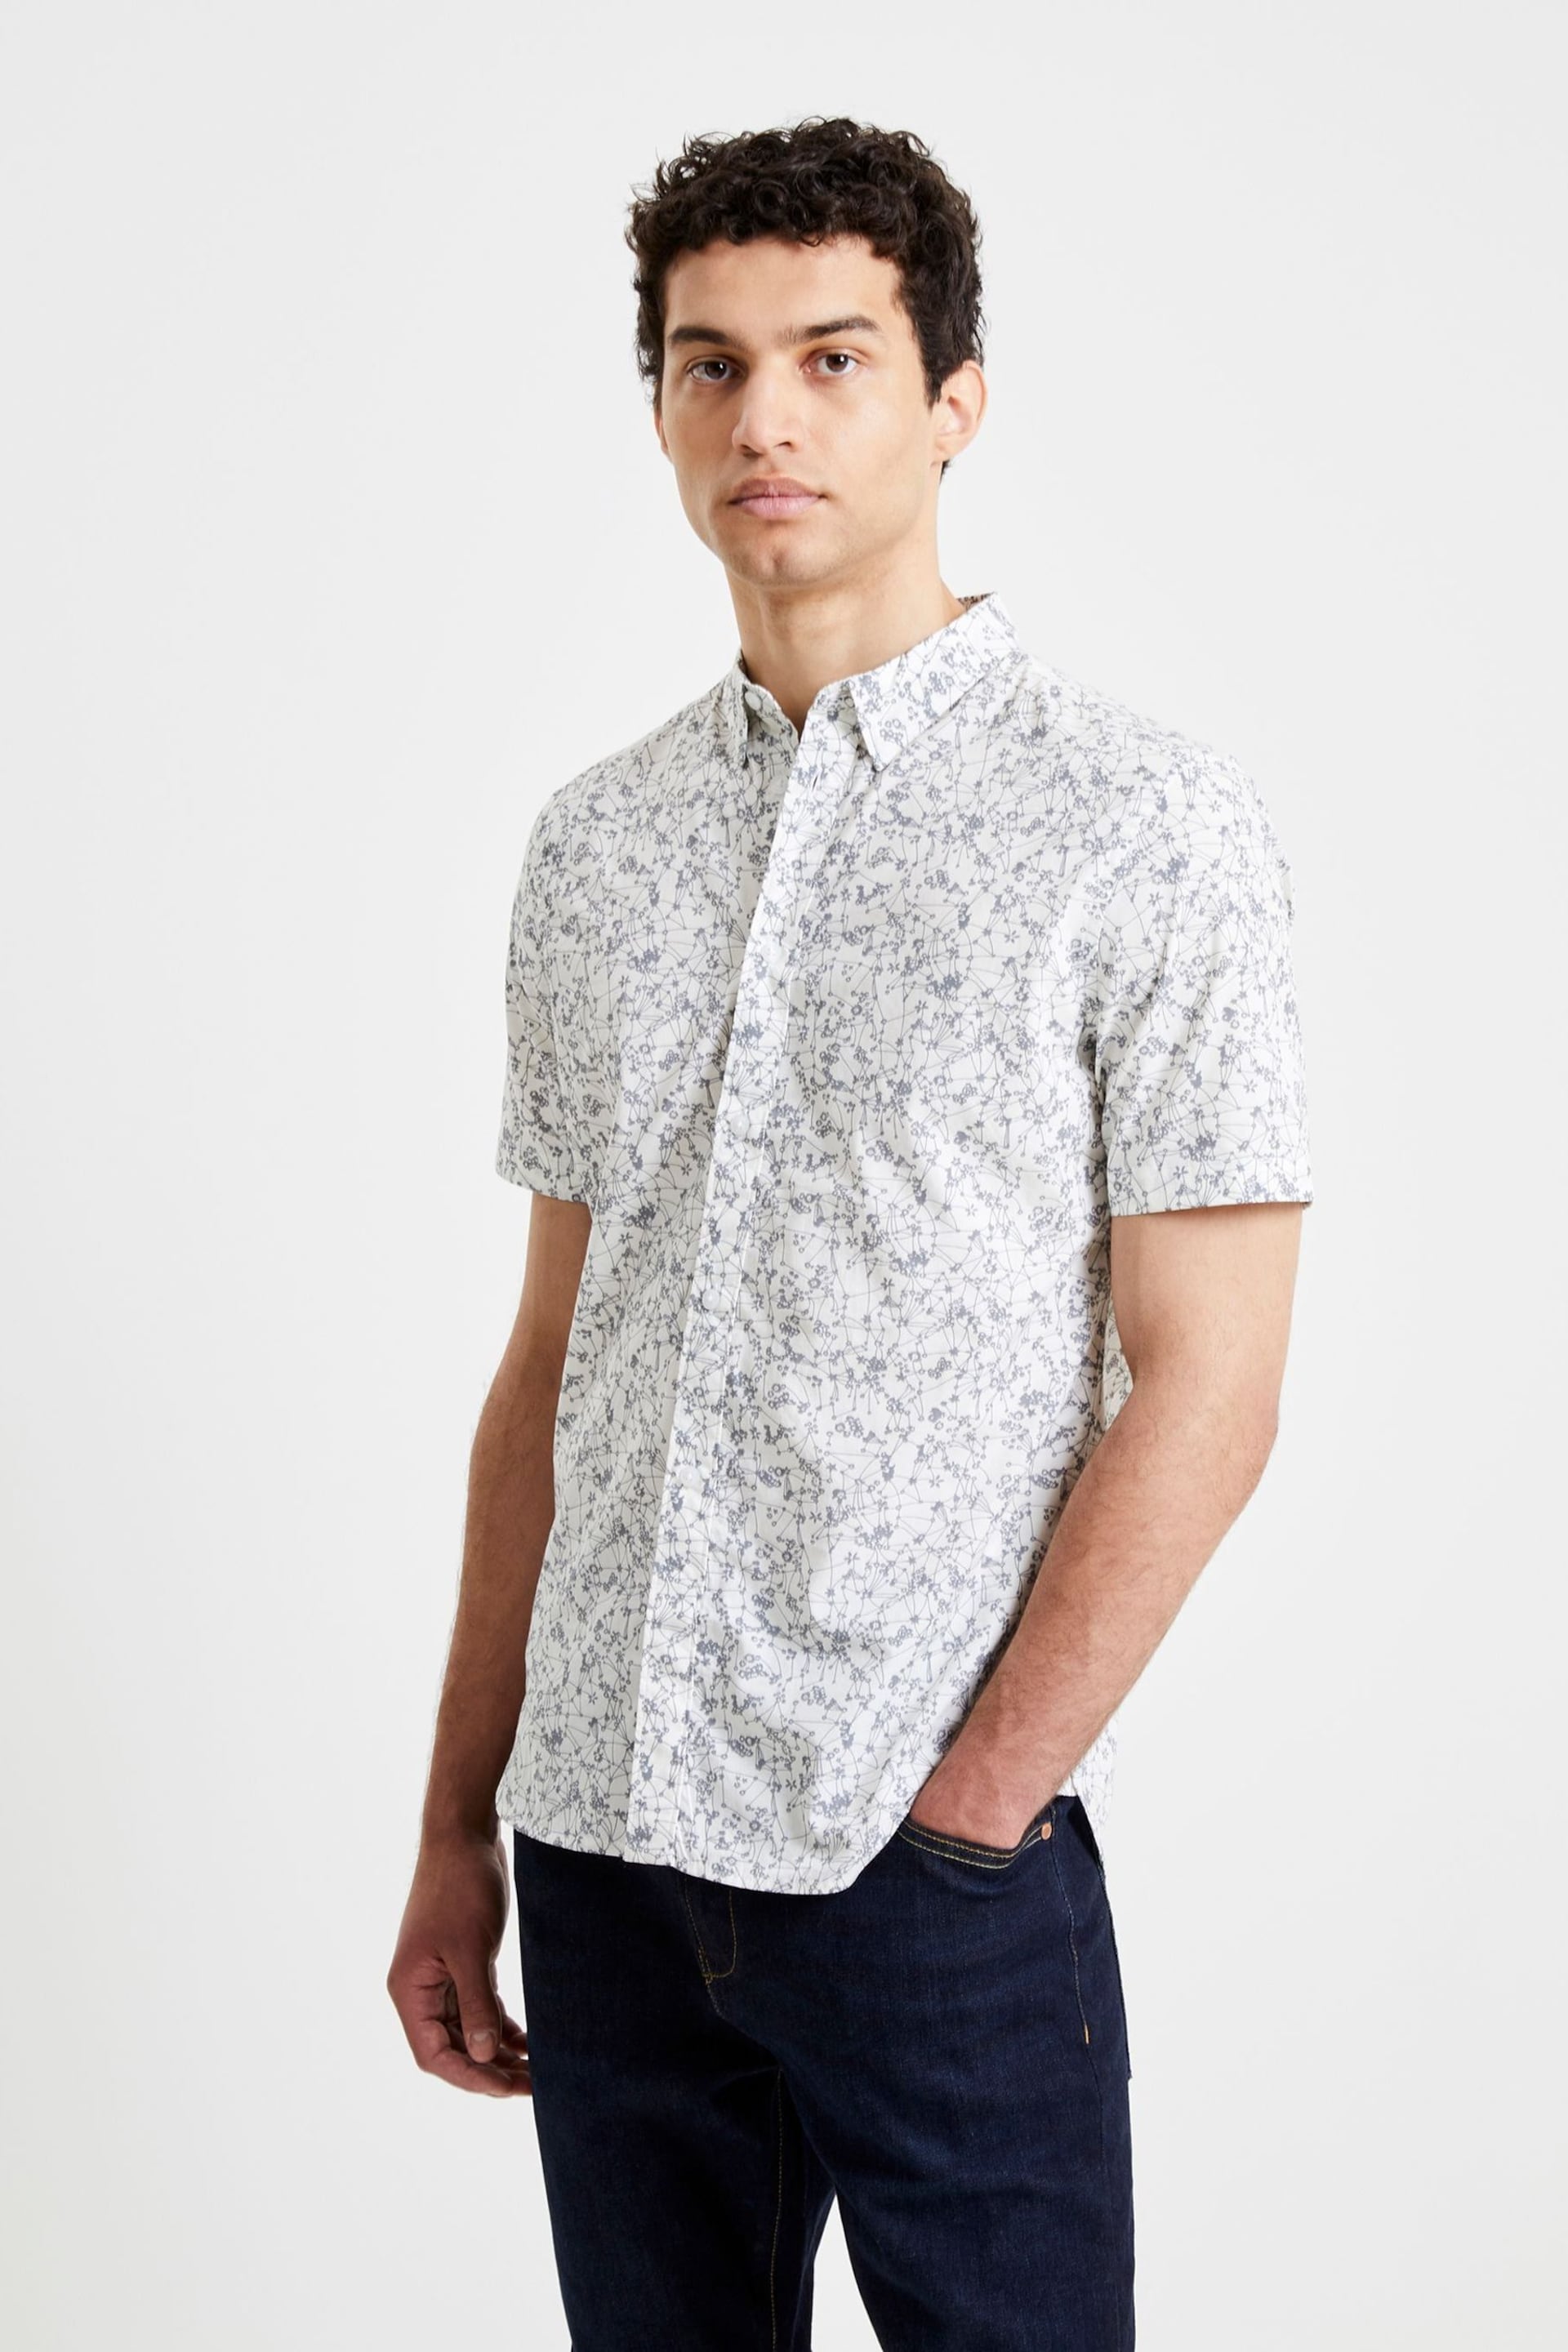 French Connection Geo Floral Short Sleeve White Shirt - Image 1 of 3